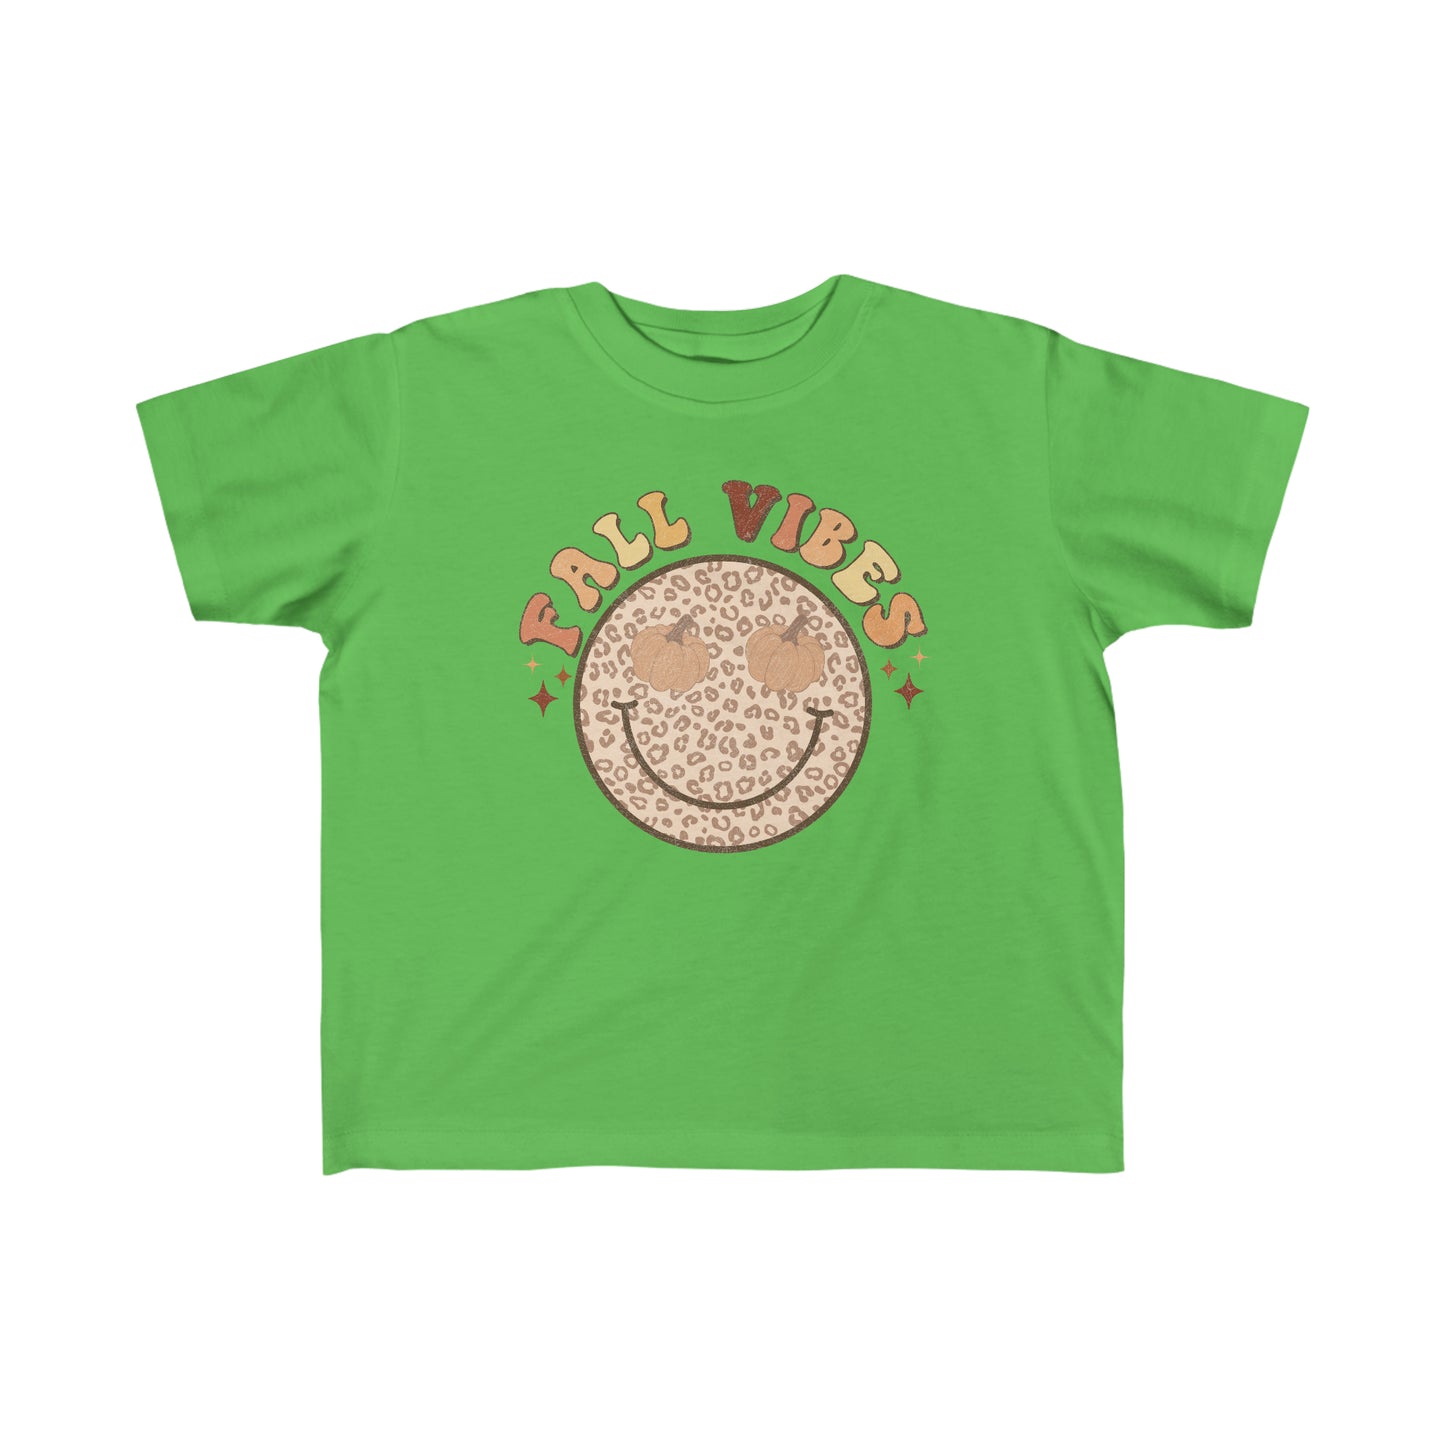 Retro Fall Vibes Toddler's Fine Jersey Tee